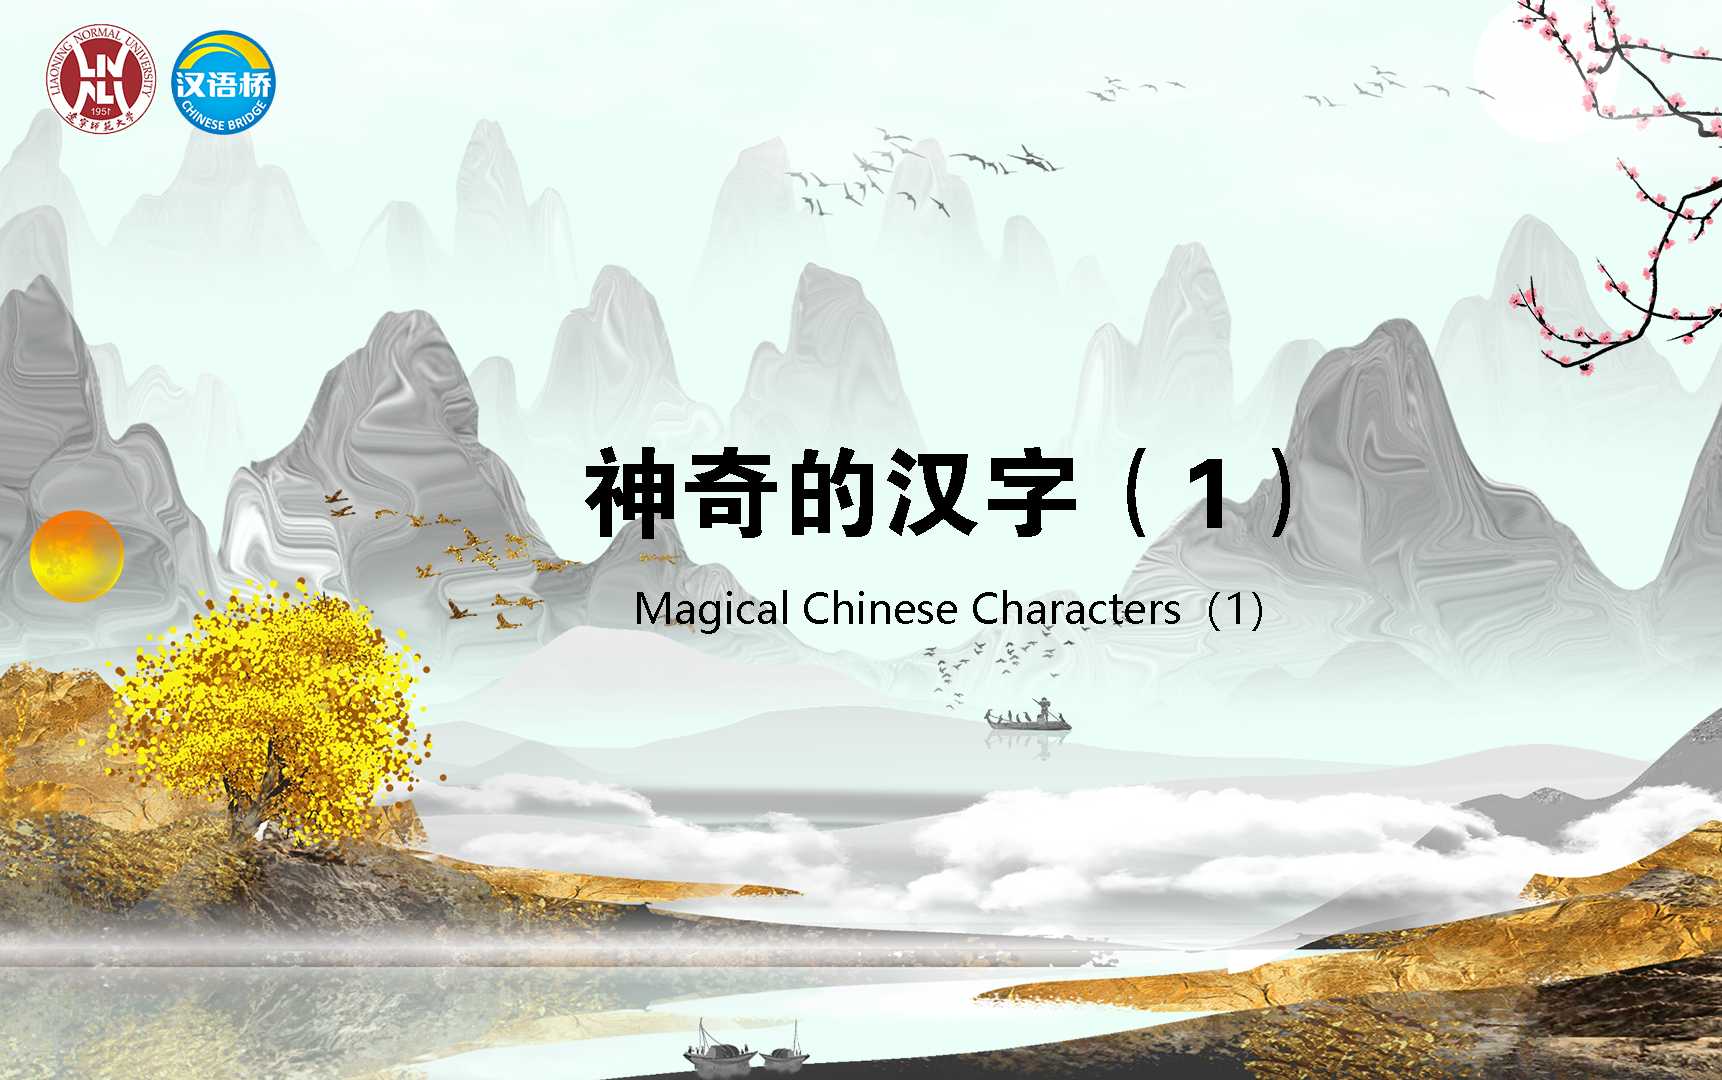 Magical Chinese Characters(1)